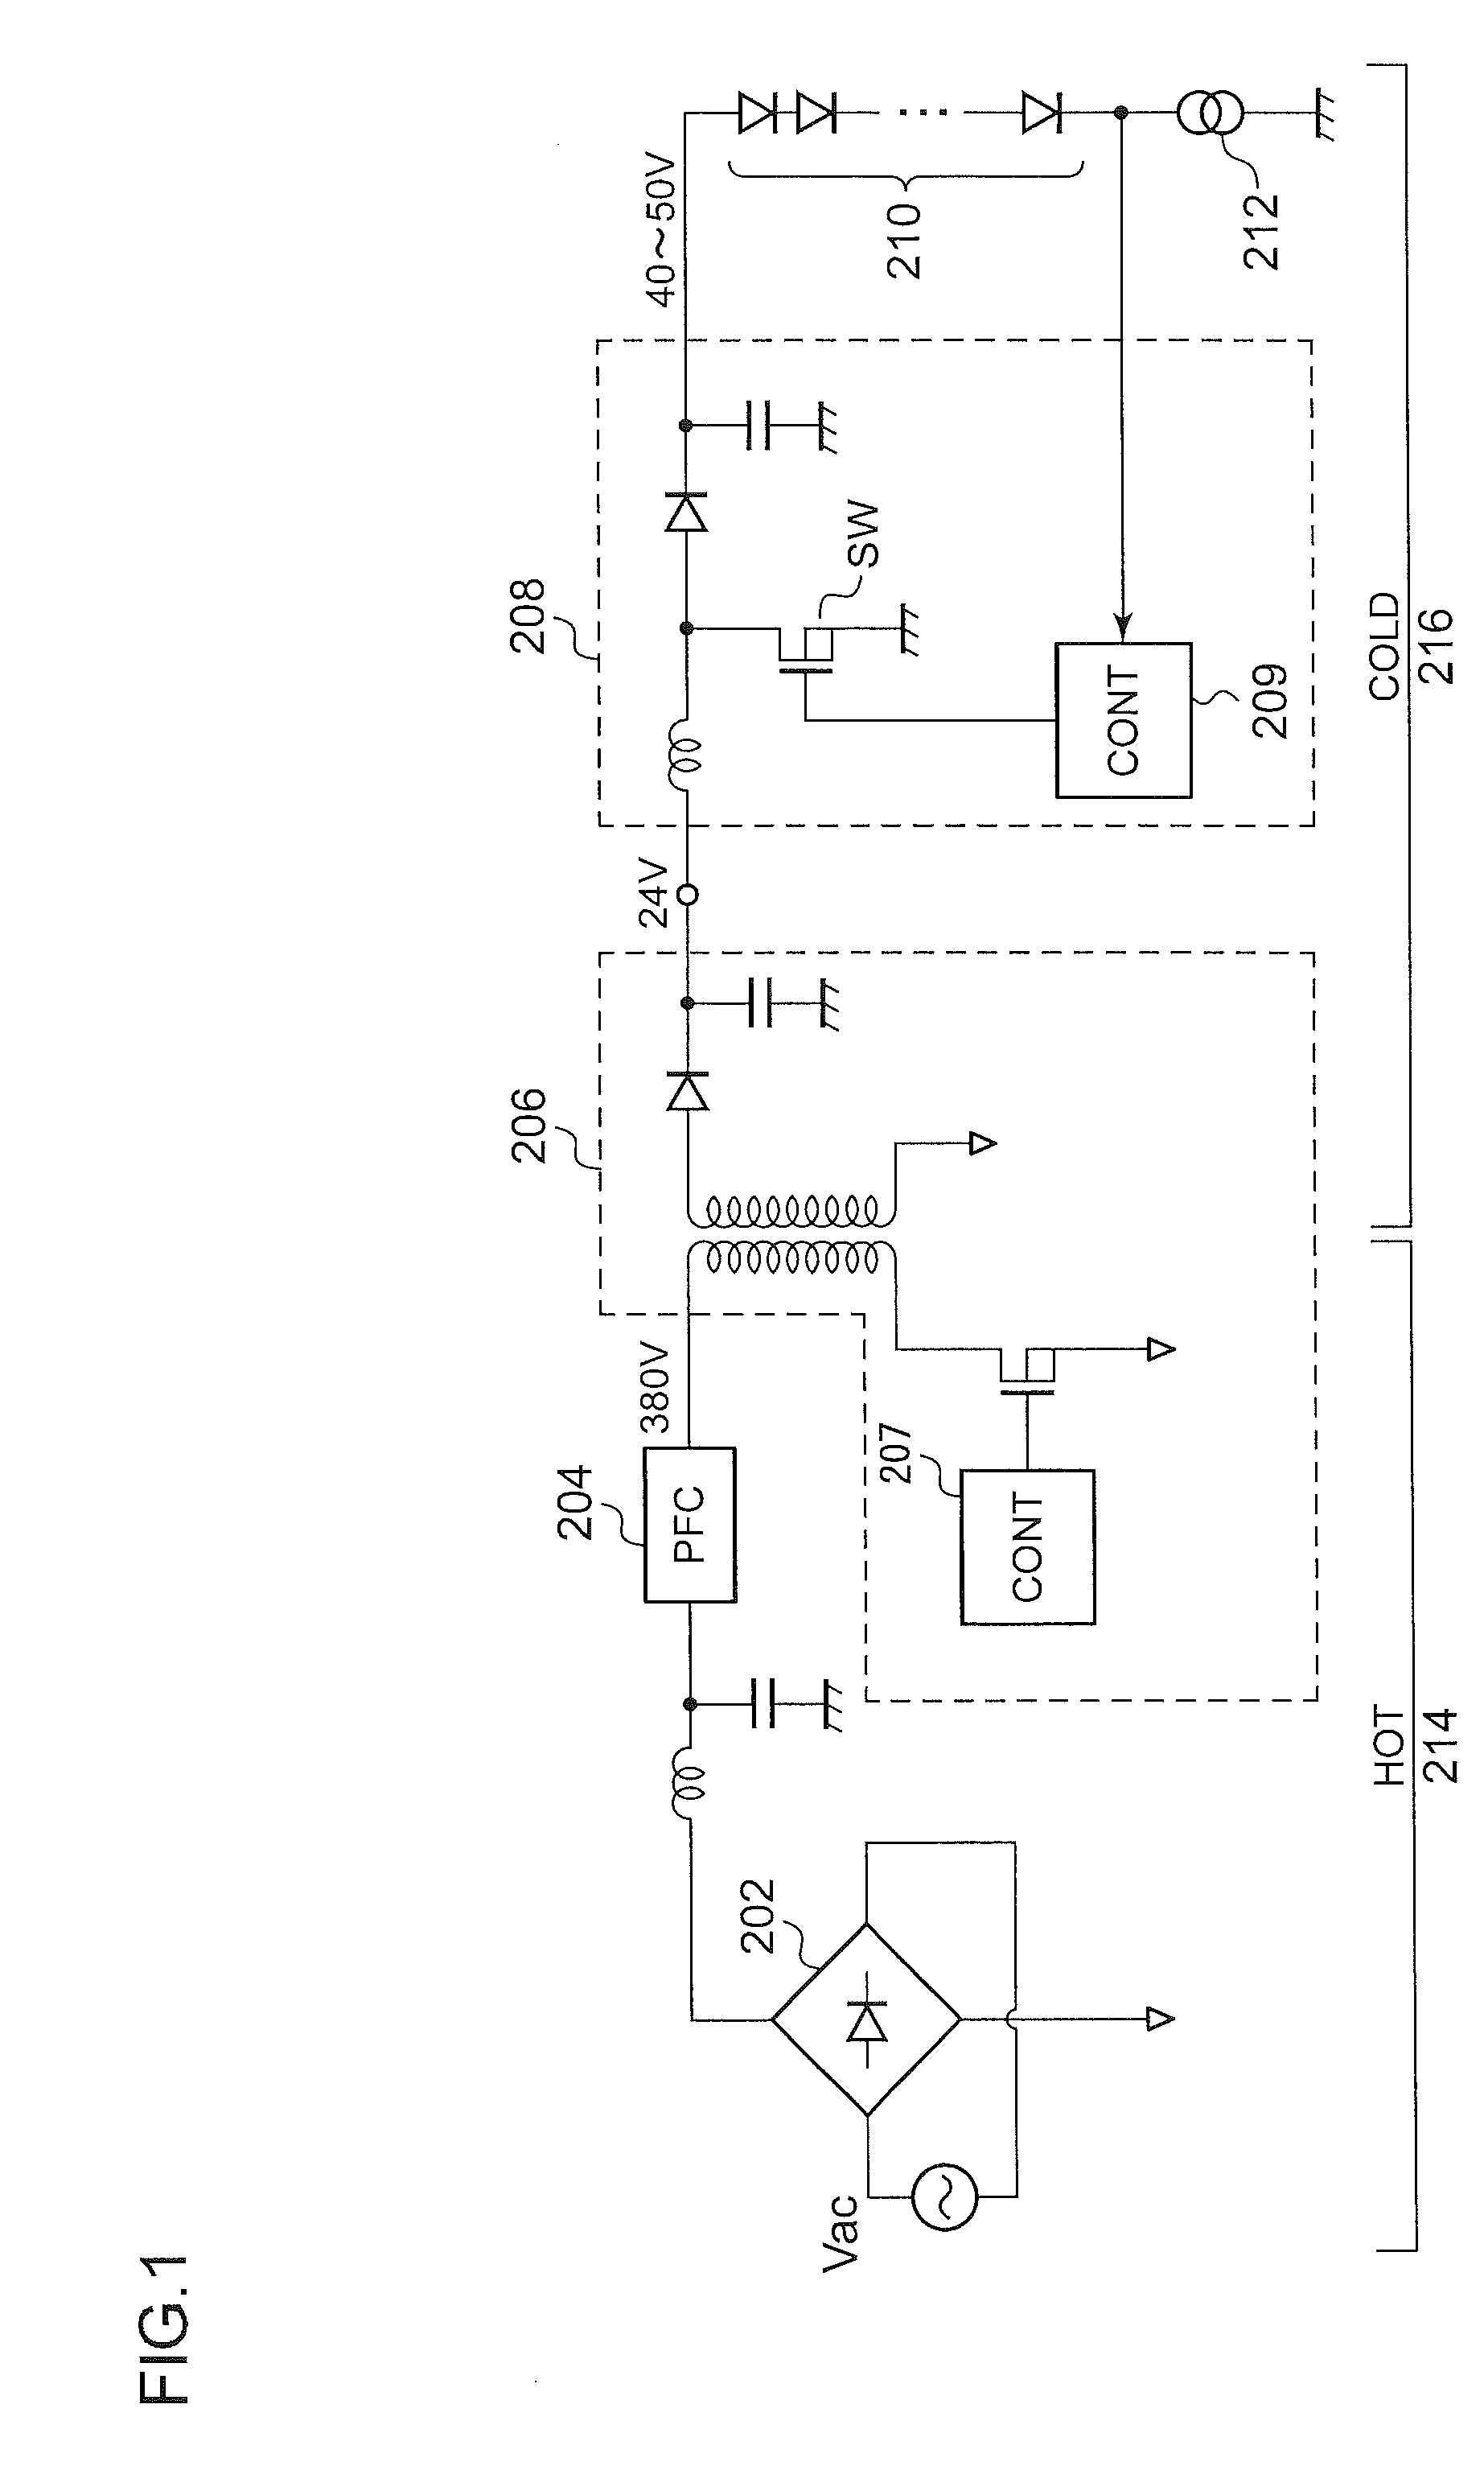 Driving circuit for light emitting diode